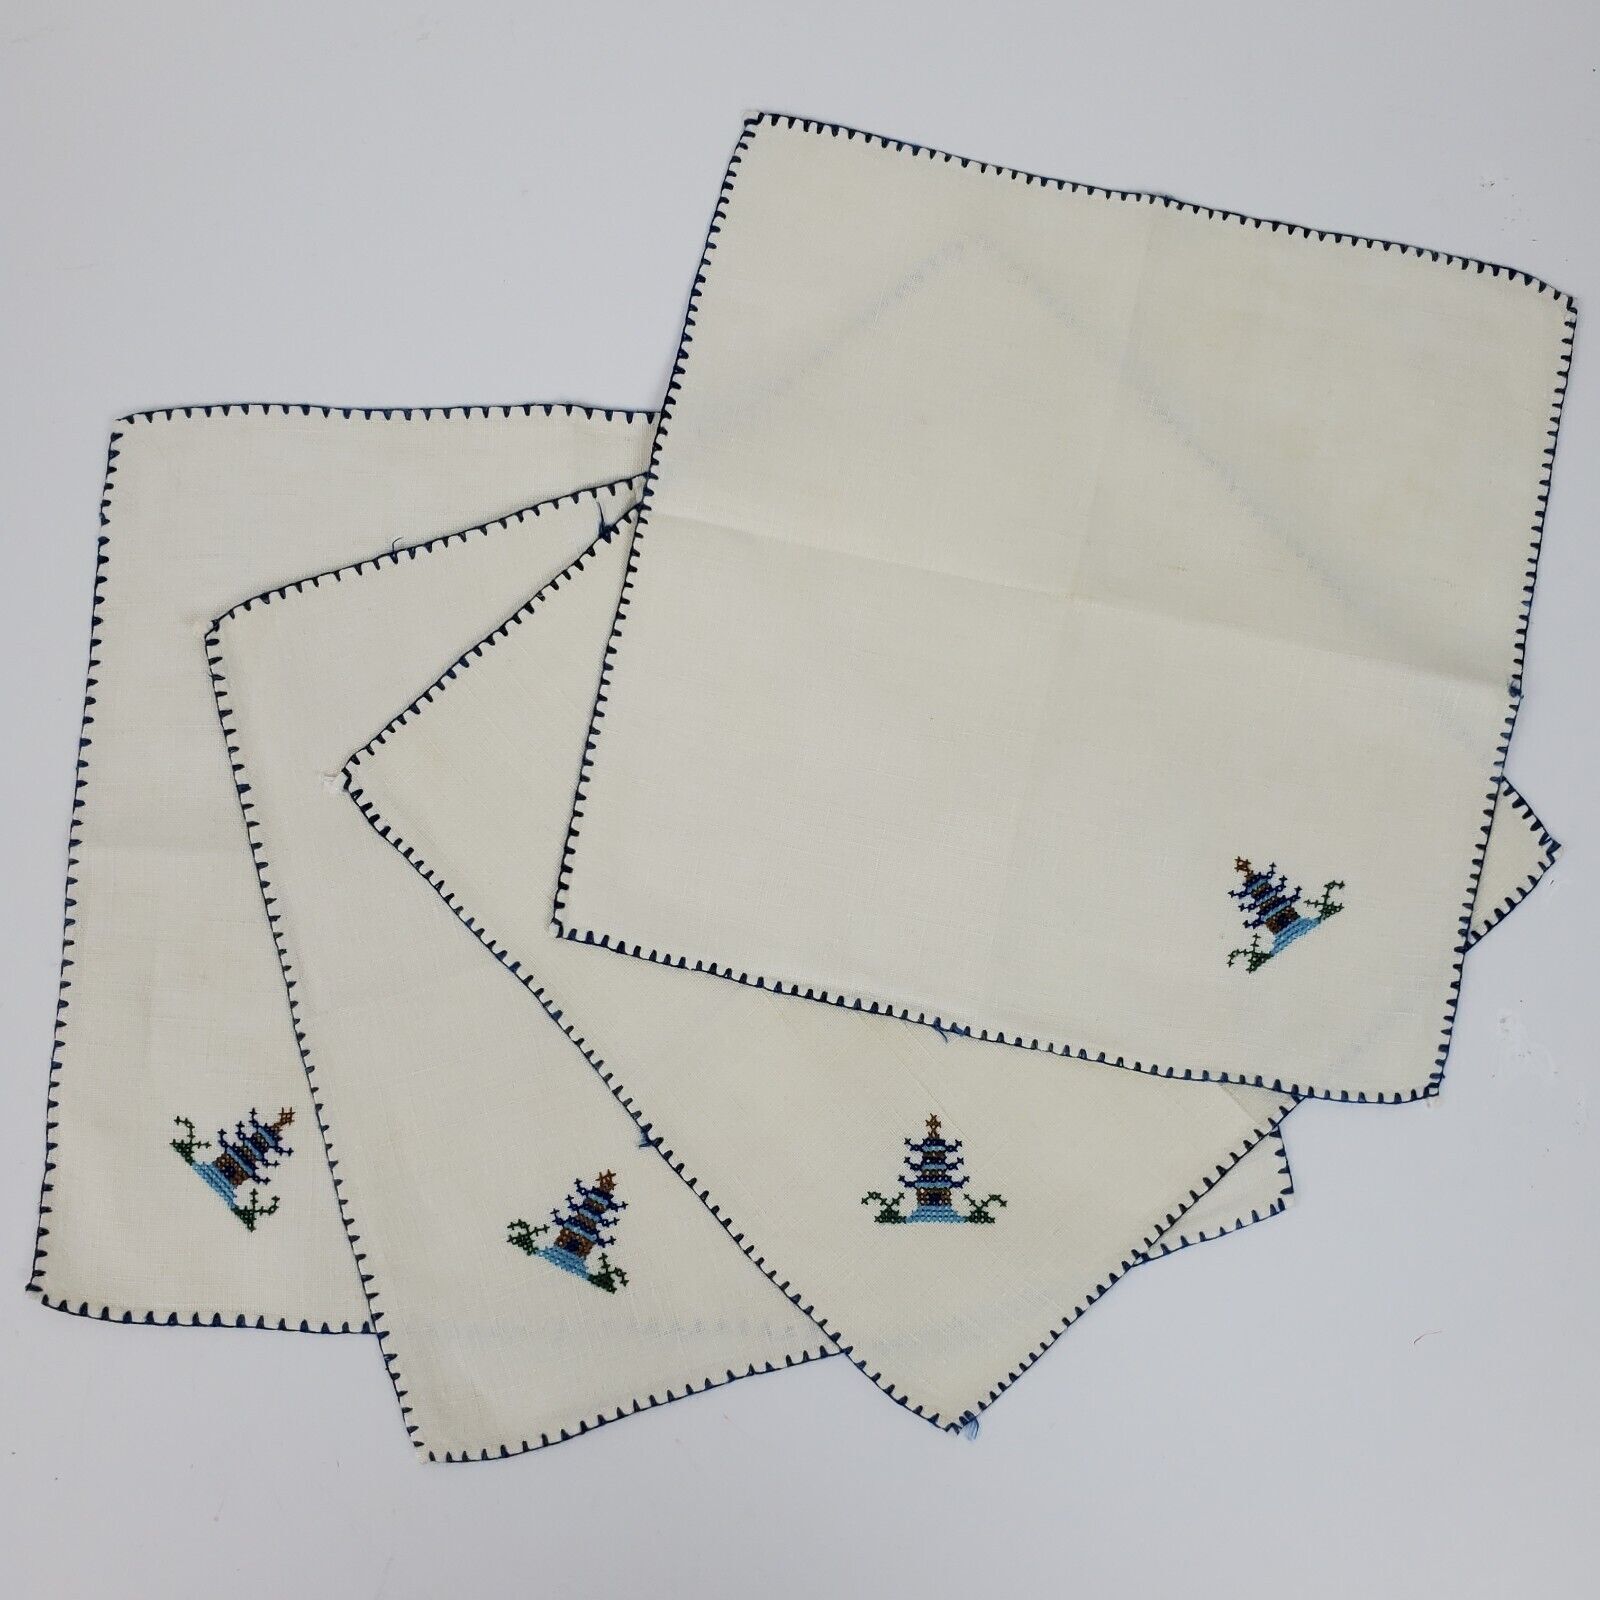 Vintage Embroidery Table Napkins 10x10 Inch SET OF 4 Beige w/ Blue Trim